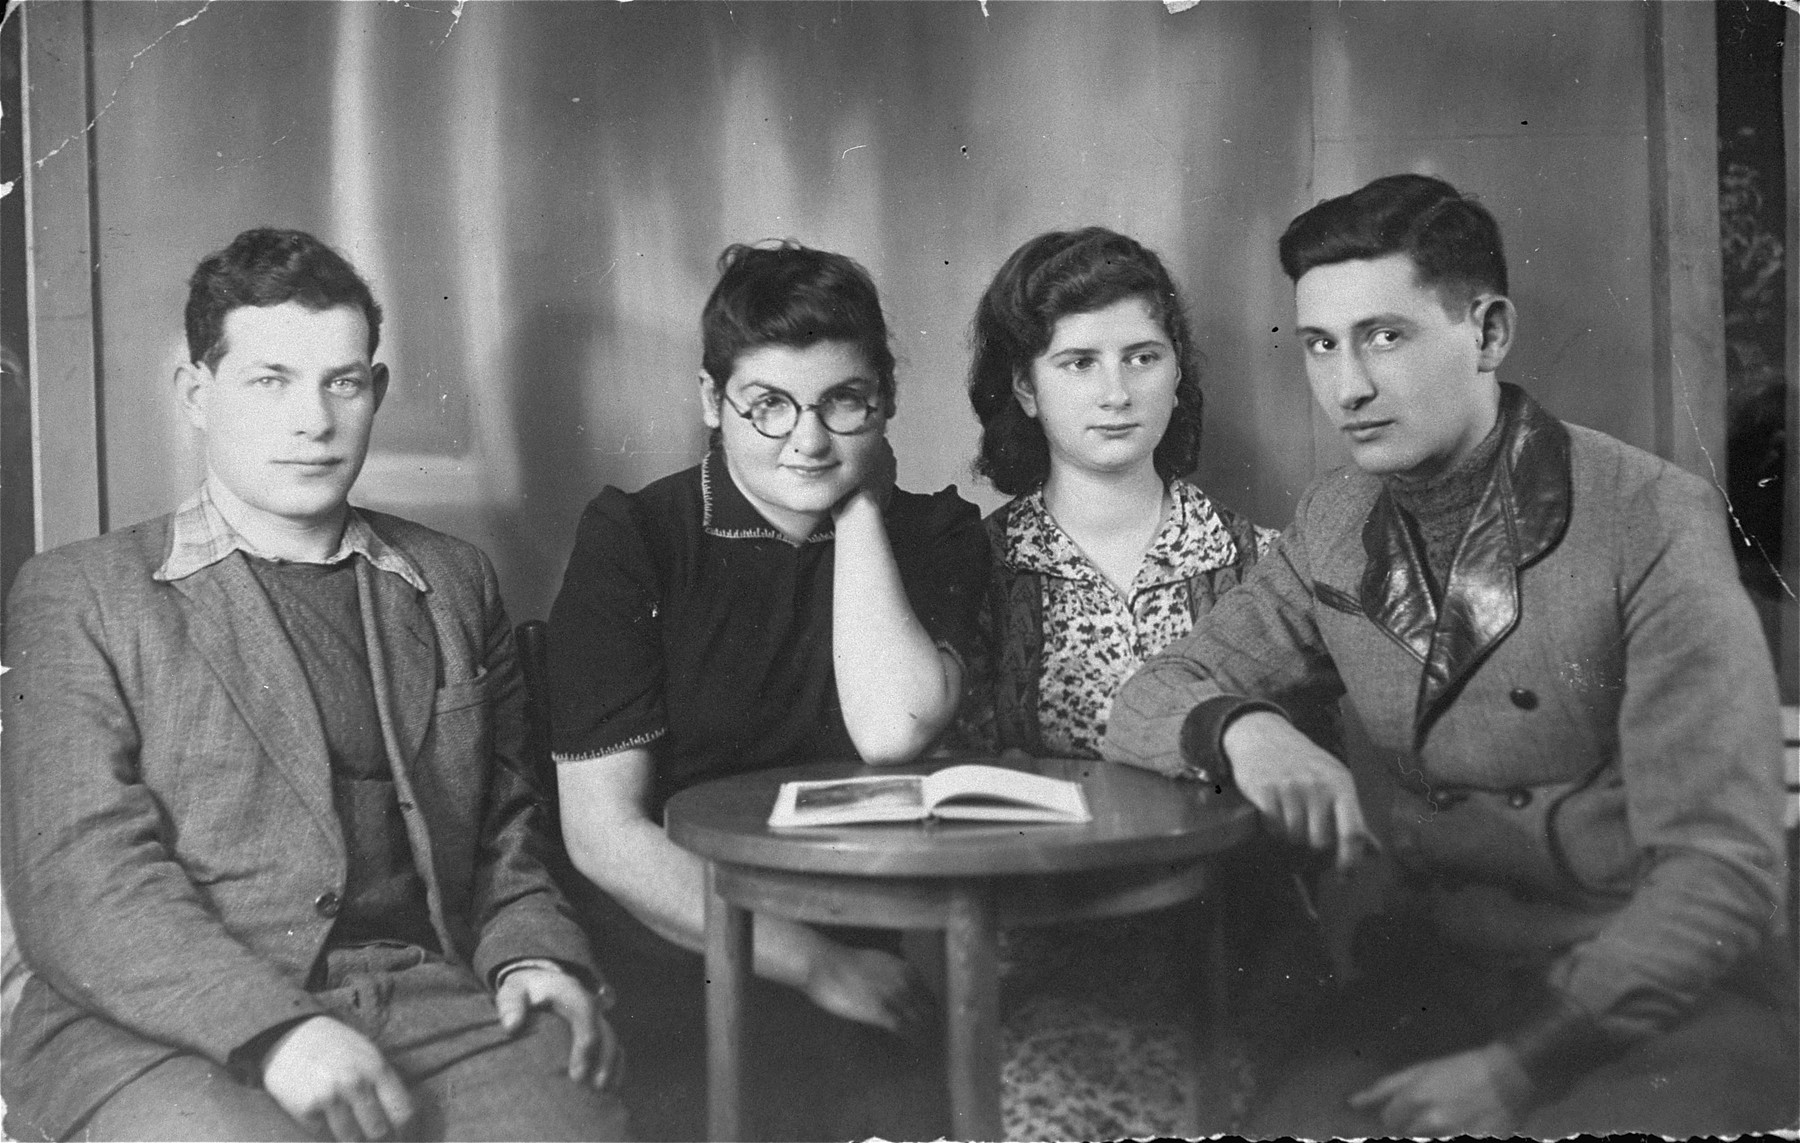 Four members of the Hashomer Hatzair Zionist collective in Zarki are seated around a table.

Pictured from left to right are: Aron Szwarc, Tamar (last name unknown), Lodzia Hamersztajn, and Berel Lemel.